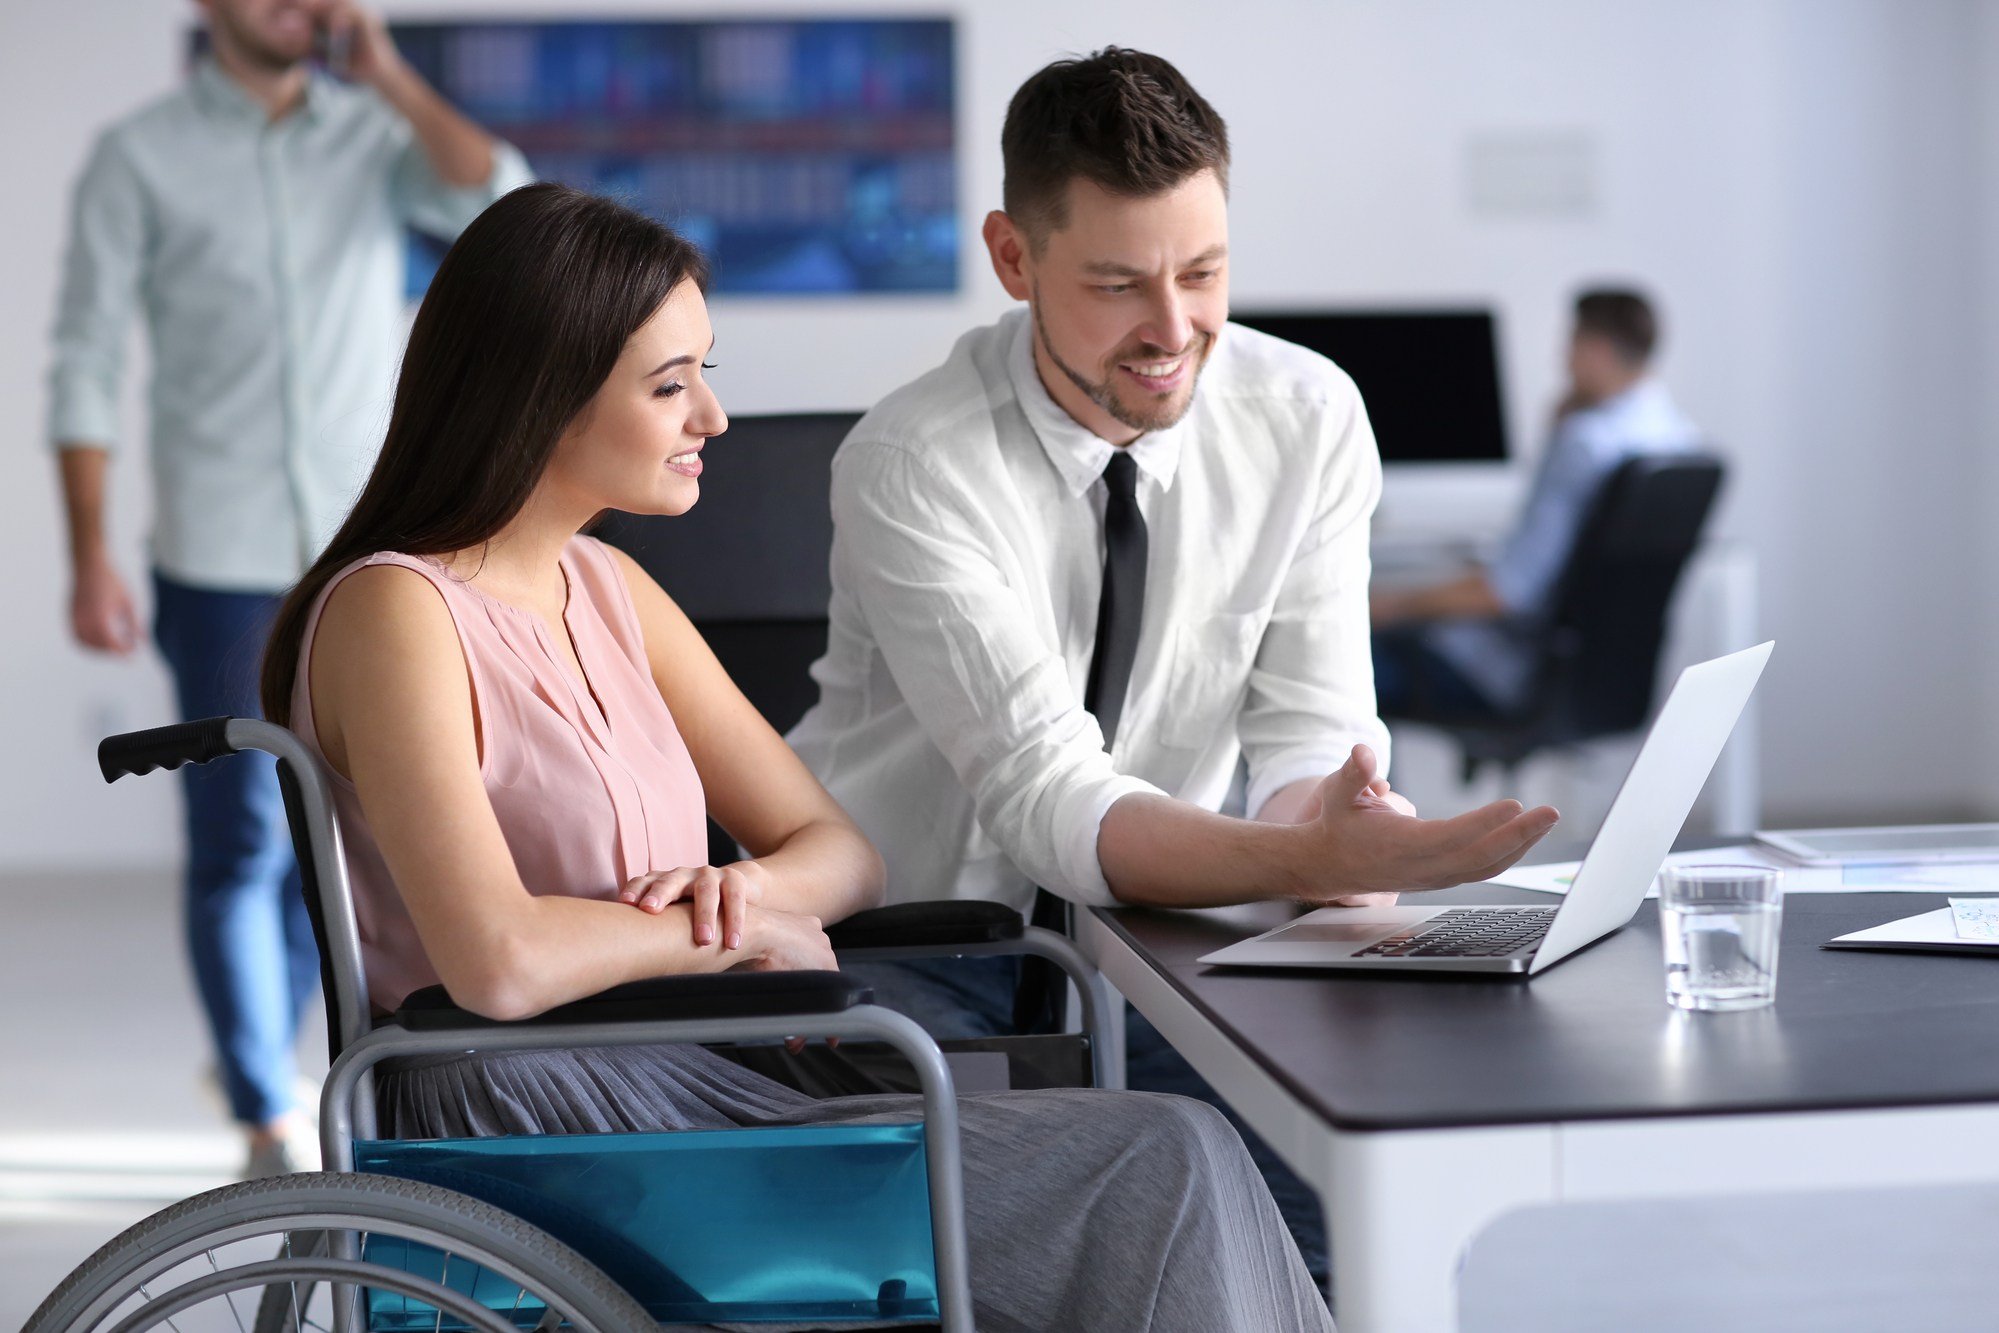 How Does Private Disability Insurance Work?